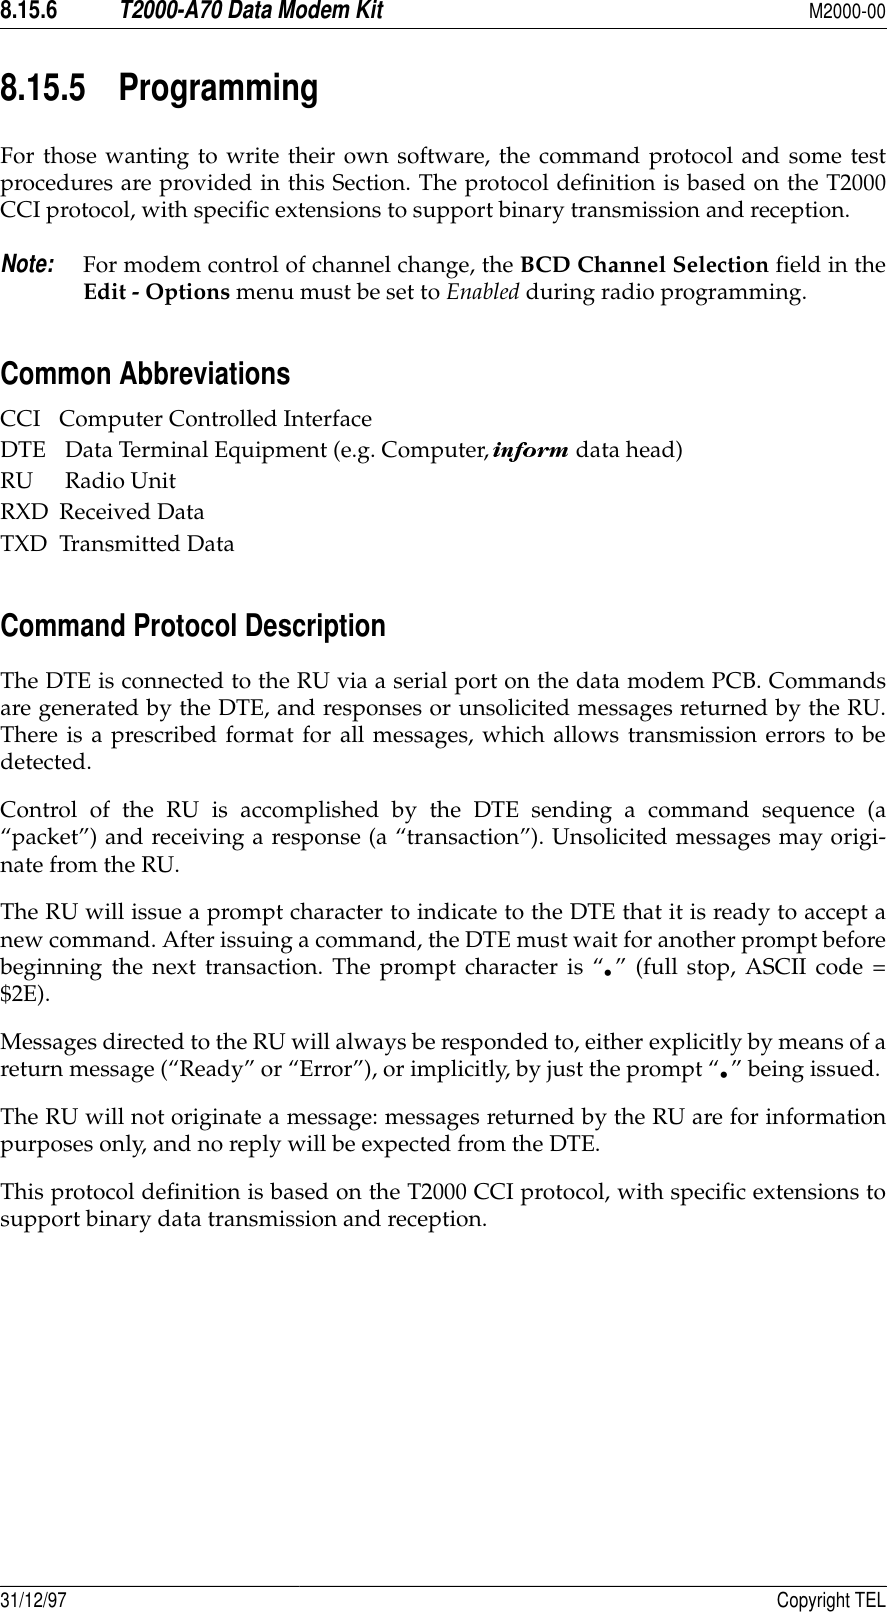 8.15.6T2000-A70 Data Modem KitM2000-0031/12/97 Copyright TEL8.15.5 ProgrammingFor those wanting to write their own software, the command protocol and some testprocedures are provided in this Section. The protocol definition is based on the T2000CCI protocol, with specific extensions to support binary transmission and reception.Note:For modem control of channel change, the BCD Channel Selection field in theEdit - Options menu must be set to Enabled during radio programming.Common AbbreviationsCCI Computer Controlled InterfaceDTE  Data Terminal Equipment (e.g. Computer,   data head)RU  Radio UnitRXD Received DataTXD Transmitted DataCommand Protocol Description The DTE is connected to the RU via a serial port on the data modem PCB. Commandsare generated by the DTE, and responses or unsolicited messages returned by the RU.There is a prescribed format for all messages, which allows transmission errors to bedetected.Control of the RU is accomplished by the DTE sending a command sequence (a“packet”) and receiving a response (a “transaction”). Unsolicited messages may origi-nate from the RU.The RU will issue a prompt character to indicate to the DTE that it is ready to accept anew command. After issuing a command, the DTE must wait for another prompt beforebeginning the next transaction. The prompt character is “•” (full stop, ASCII code =$2E).Messages directed to the RU will always be responded to, either explicitly by means of areturn message (“Ready” or “Error”), or implicitly, by just the prompt “•” being issued. The RU will not originate a message: messages returned by the RU are for informationpurposes only, and no reply will be expected from the DTE.This protocol definition is based on the T2000 CCI protocol, with specific extensions tosupport binary data transmission and reception.